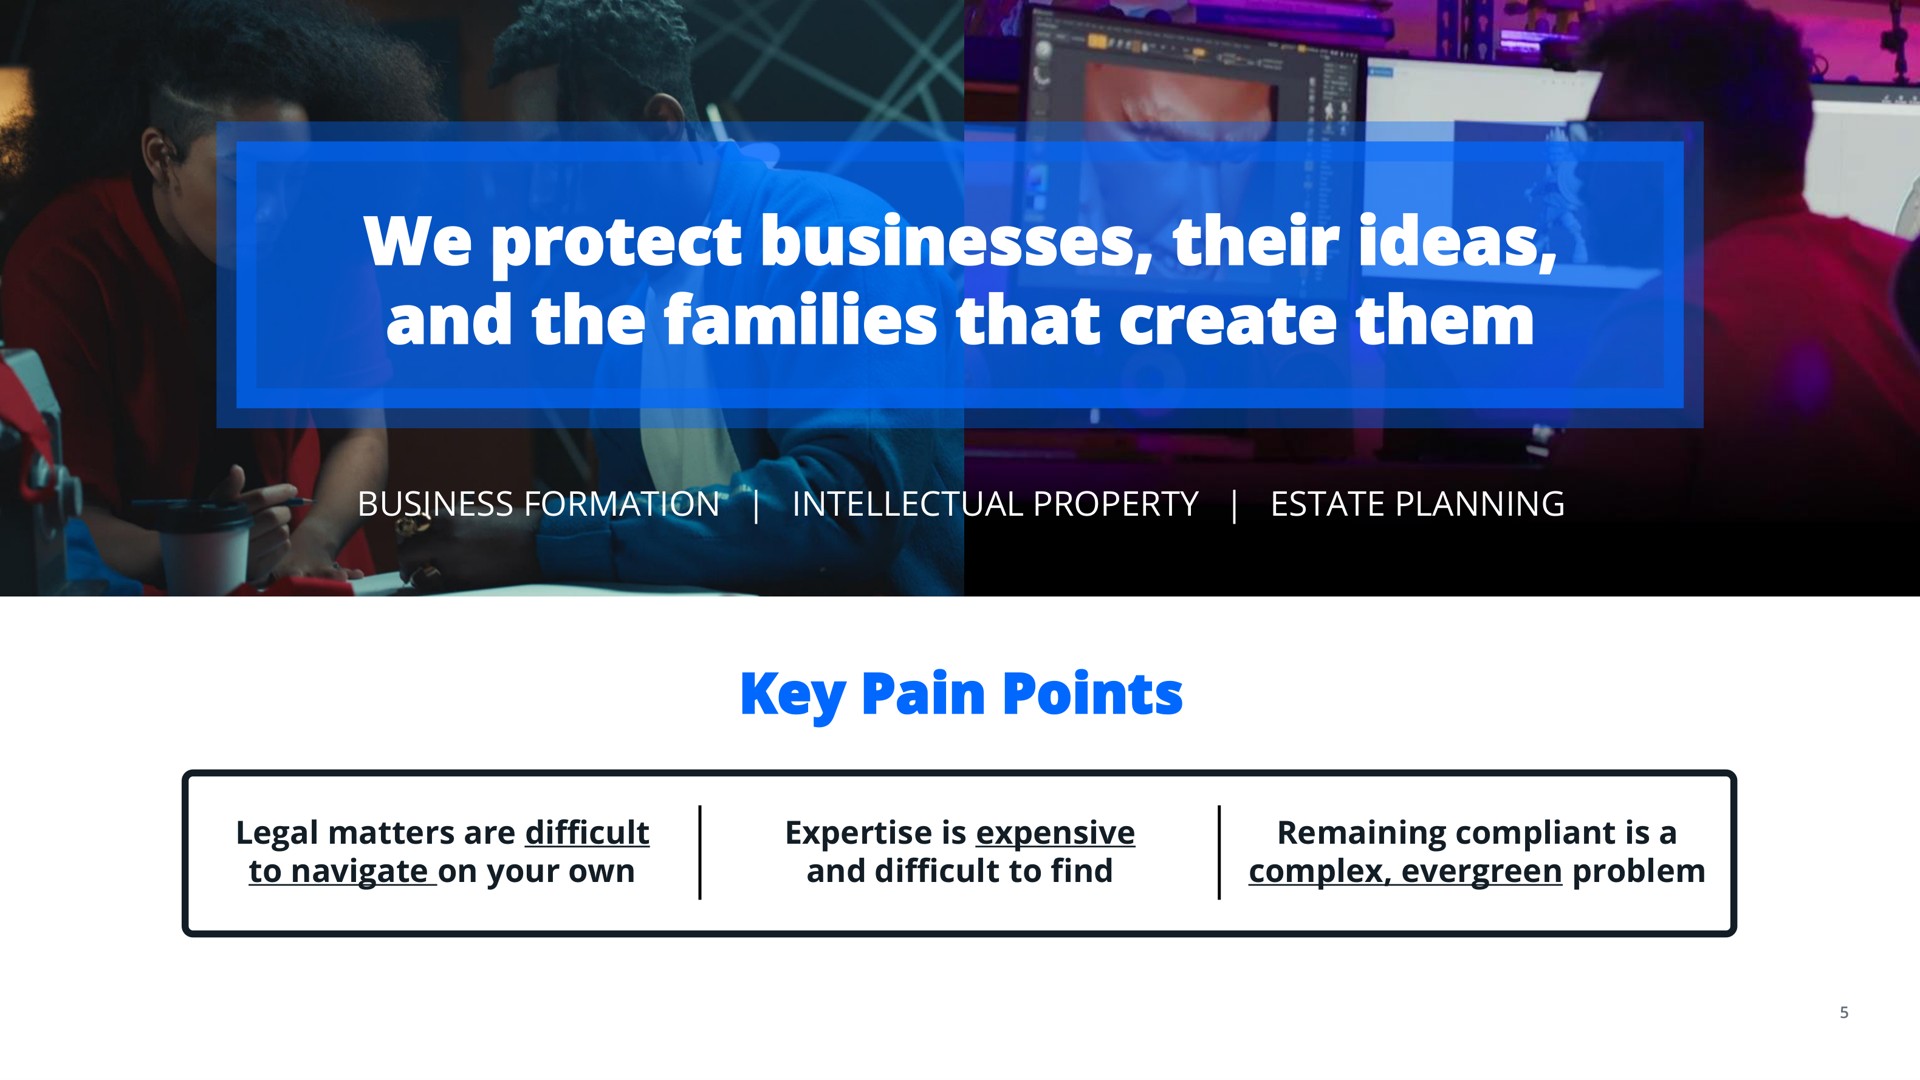 we protect businesses their ideas and the families that create them key pain points | LegalZoom.com